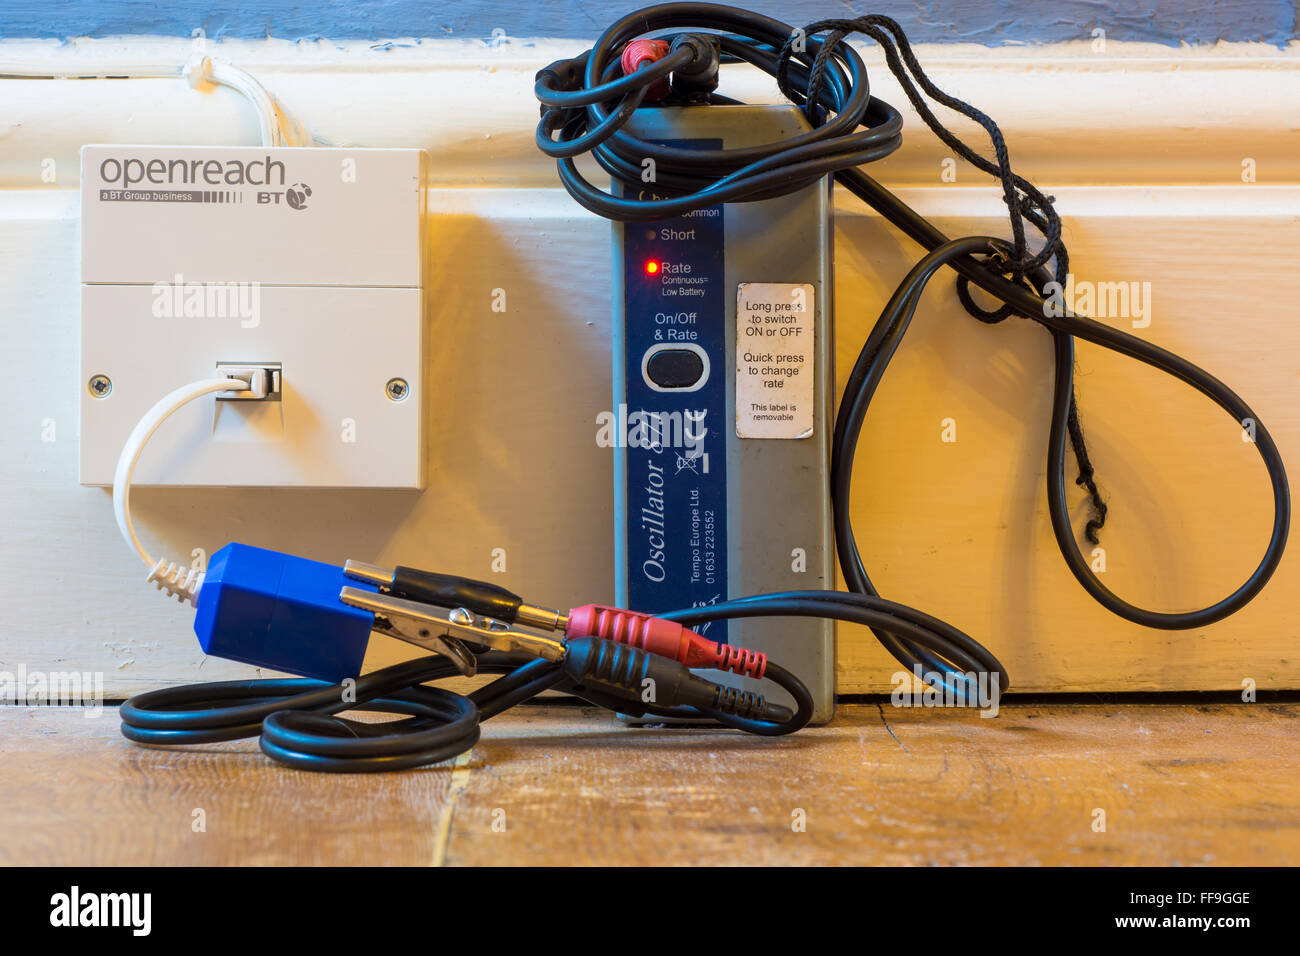 BT Openreach connection equipment in home socket. Installation equipment in use by the company responsible for UK phone lines Stock Photo